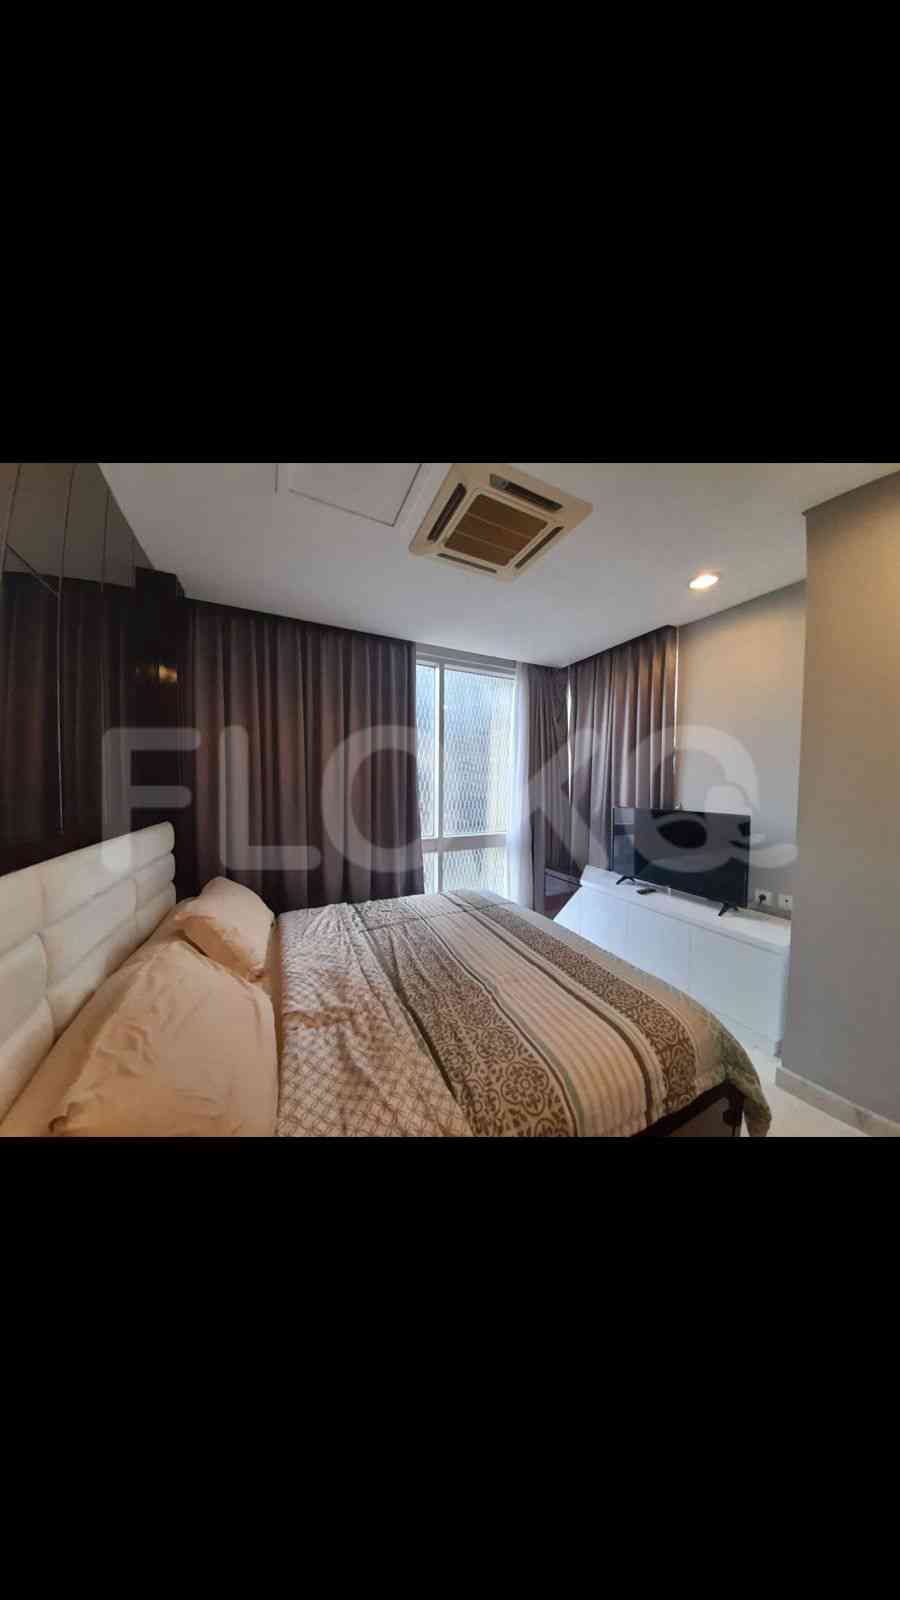 2 Bedroom on 18th Floor for Rent in The Grove Apartment - fku78d 2